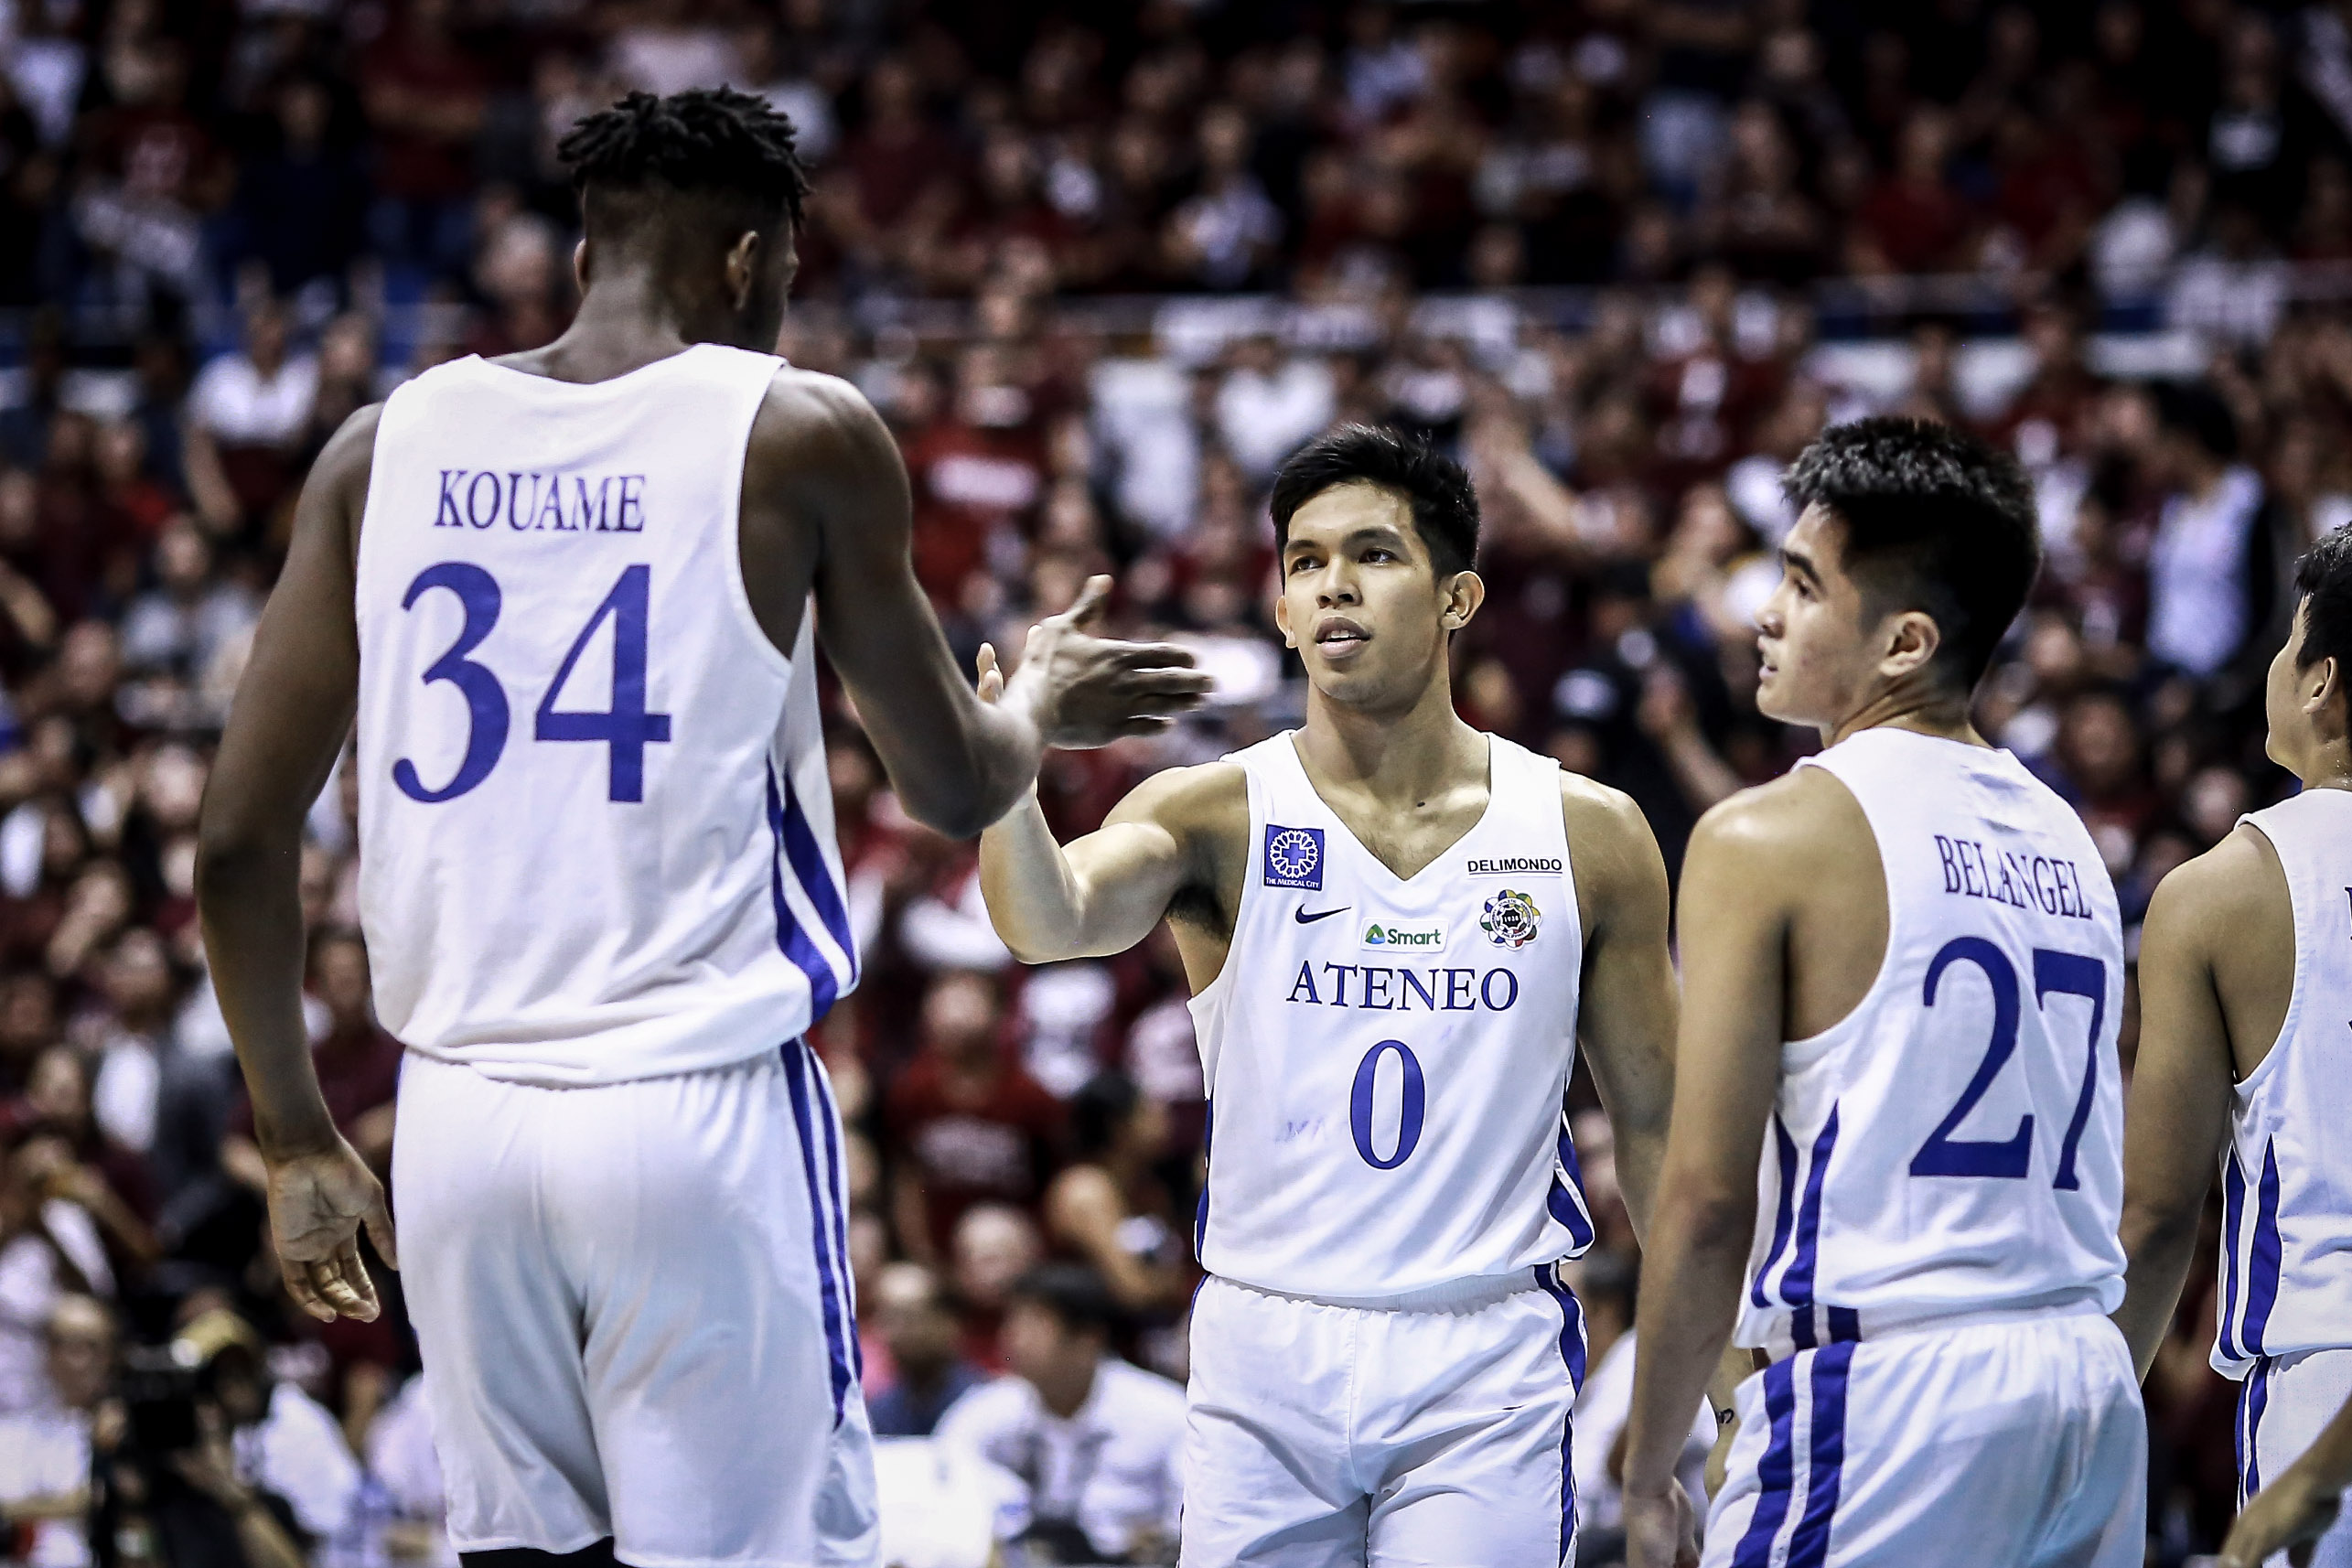 UAAP teams pick Ateneo as team to beat